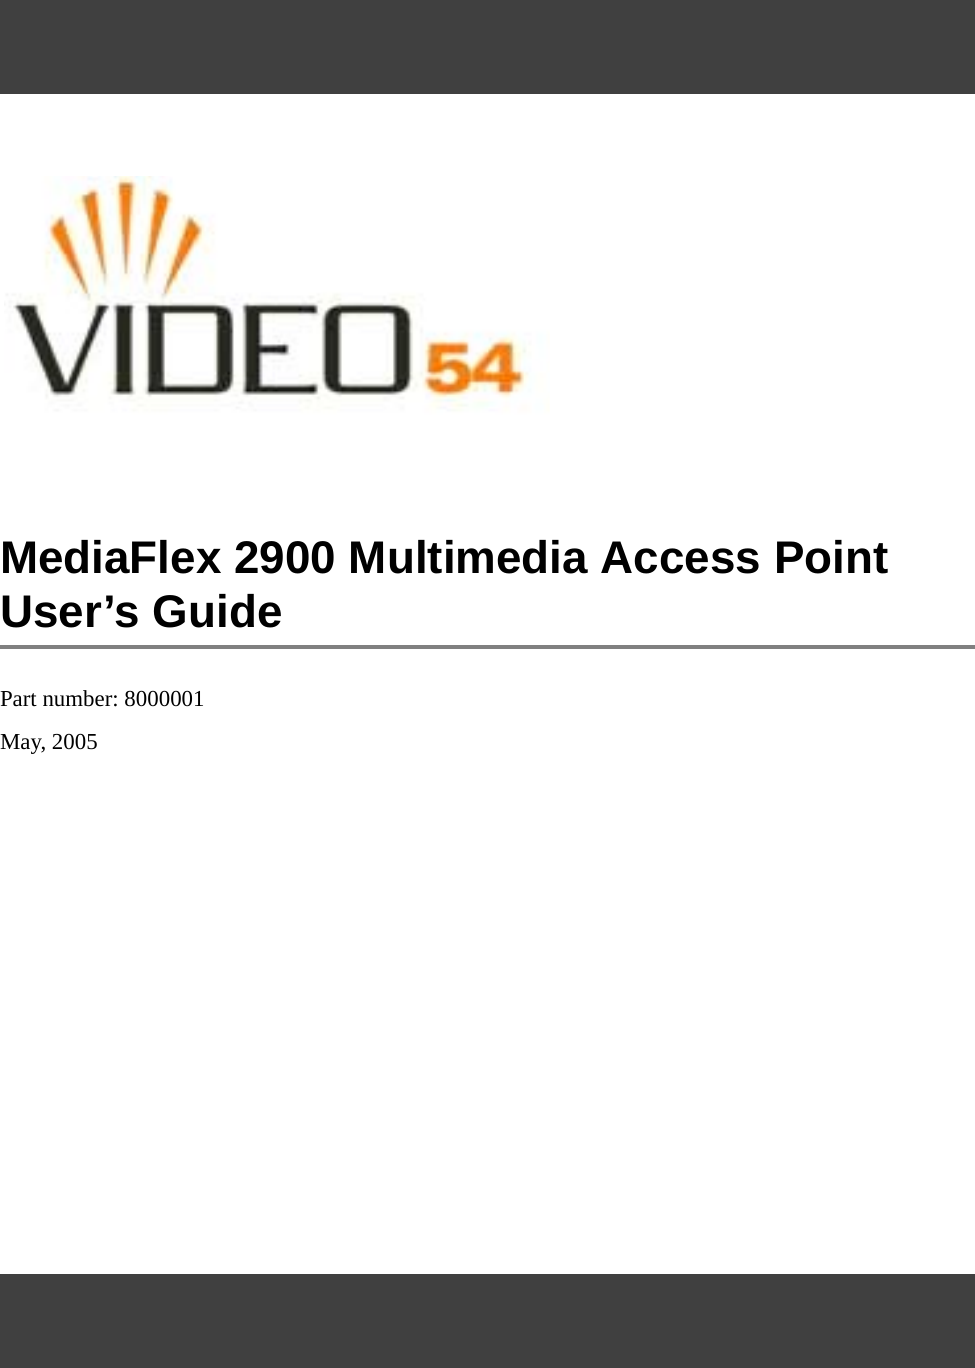 MediaFlex 2900 Multimedia Access Point User’s GuidePart number: 8000001 May, 2005